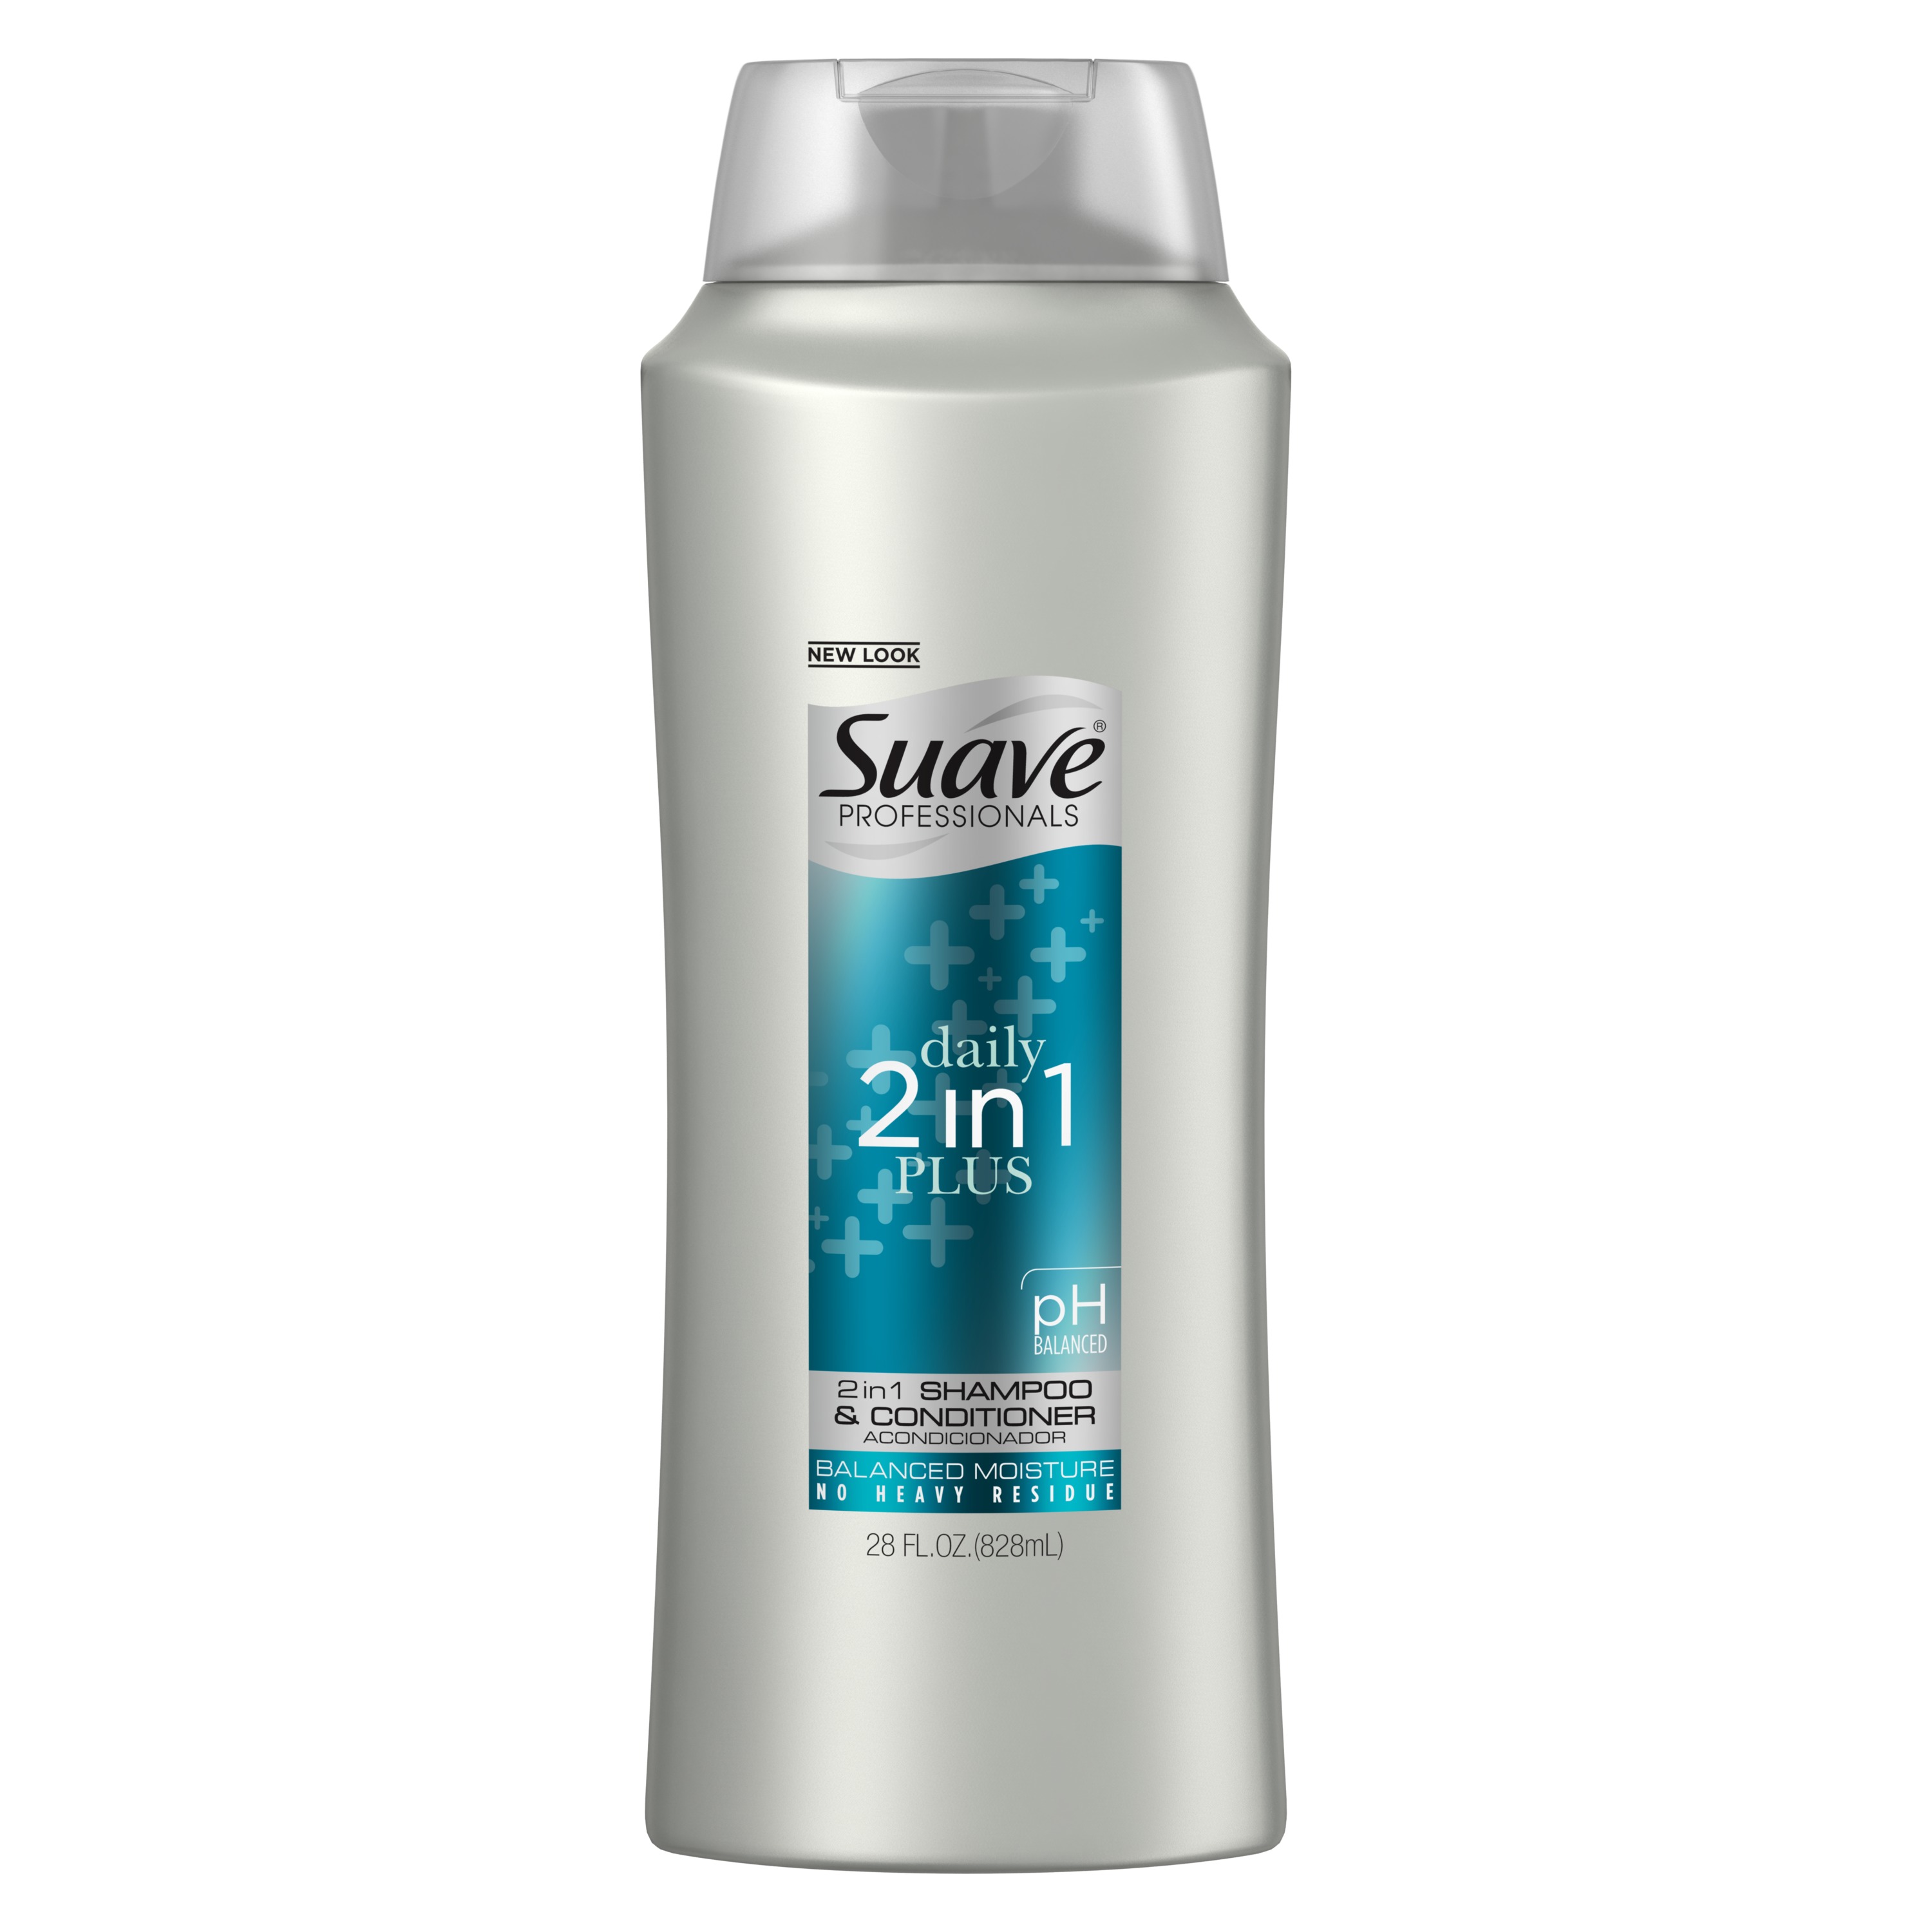 Suave Professionals 2 in 1 Shampoo and Conditioner Plus 28 oz, 4 count - image 2 of 9